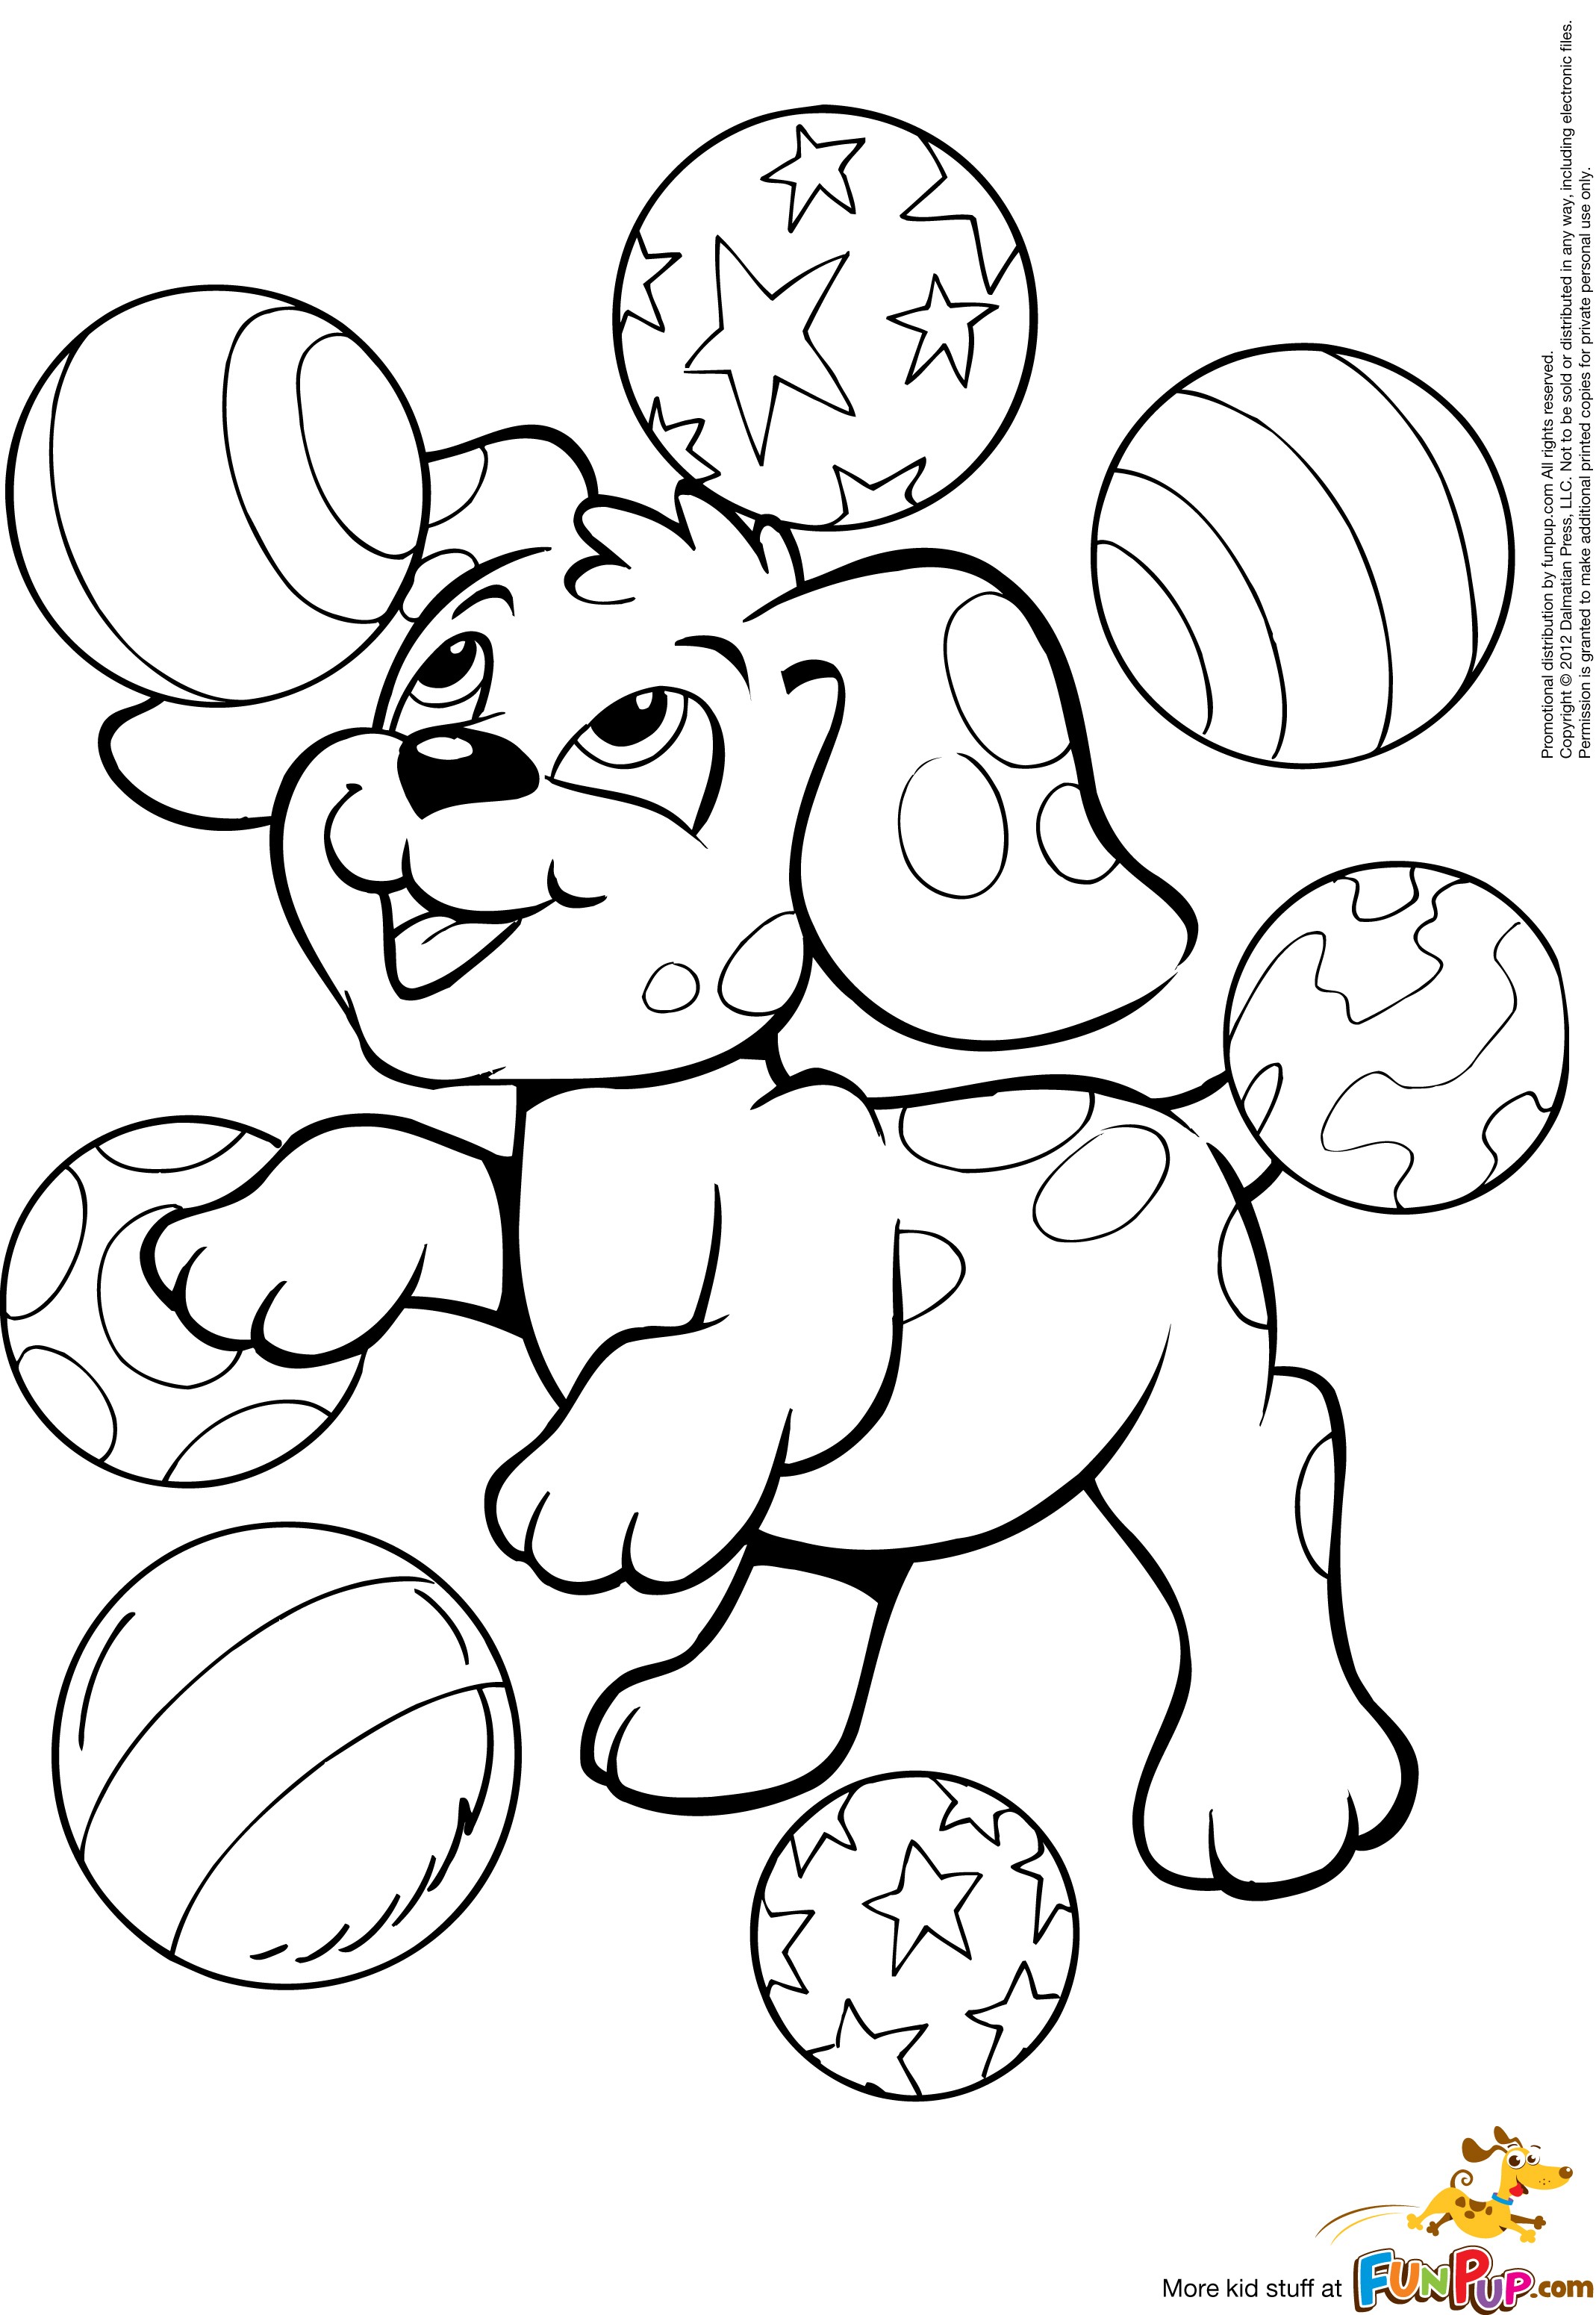 printable-cute-puppy-coloring-pages-at-getdrawings-free-download